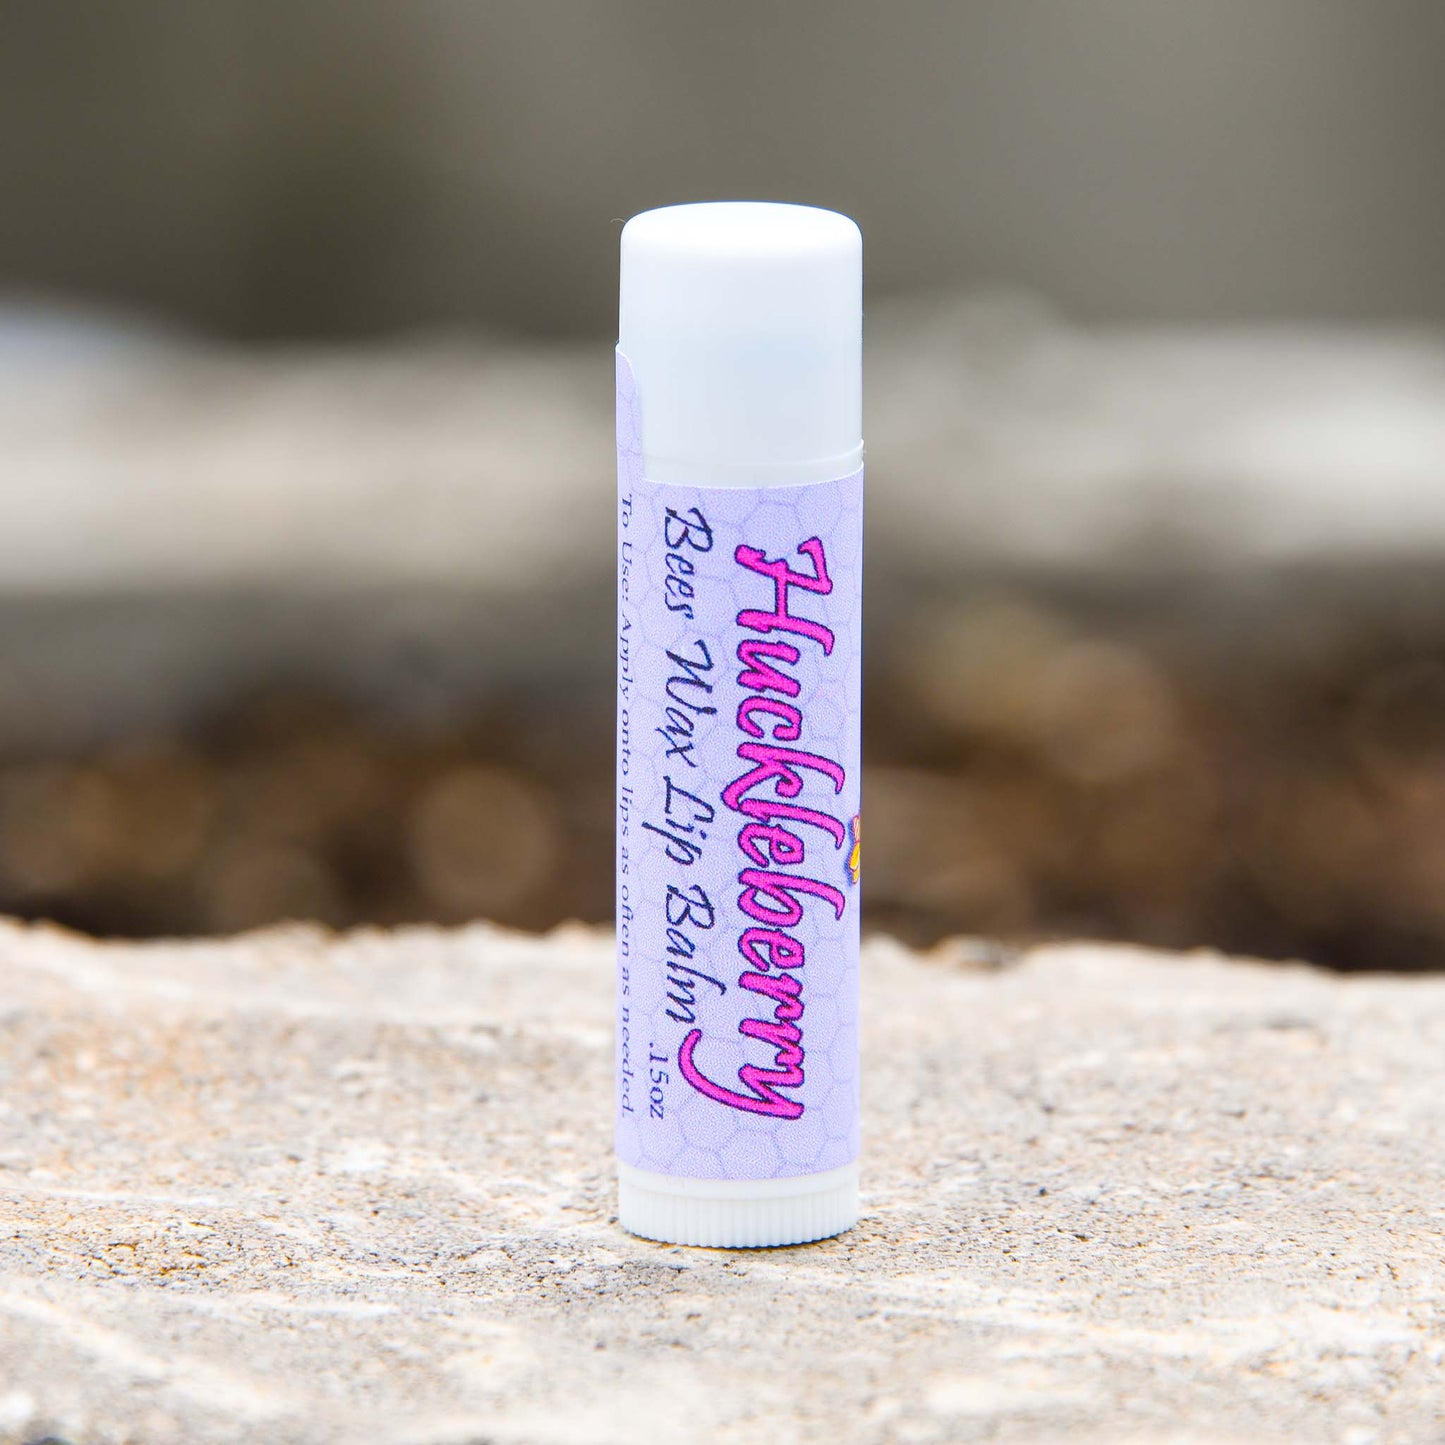 Huckleberry Bees Wax Lip Balm From Bee Your Own Valentine